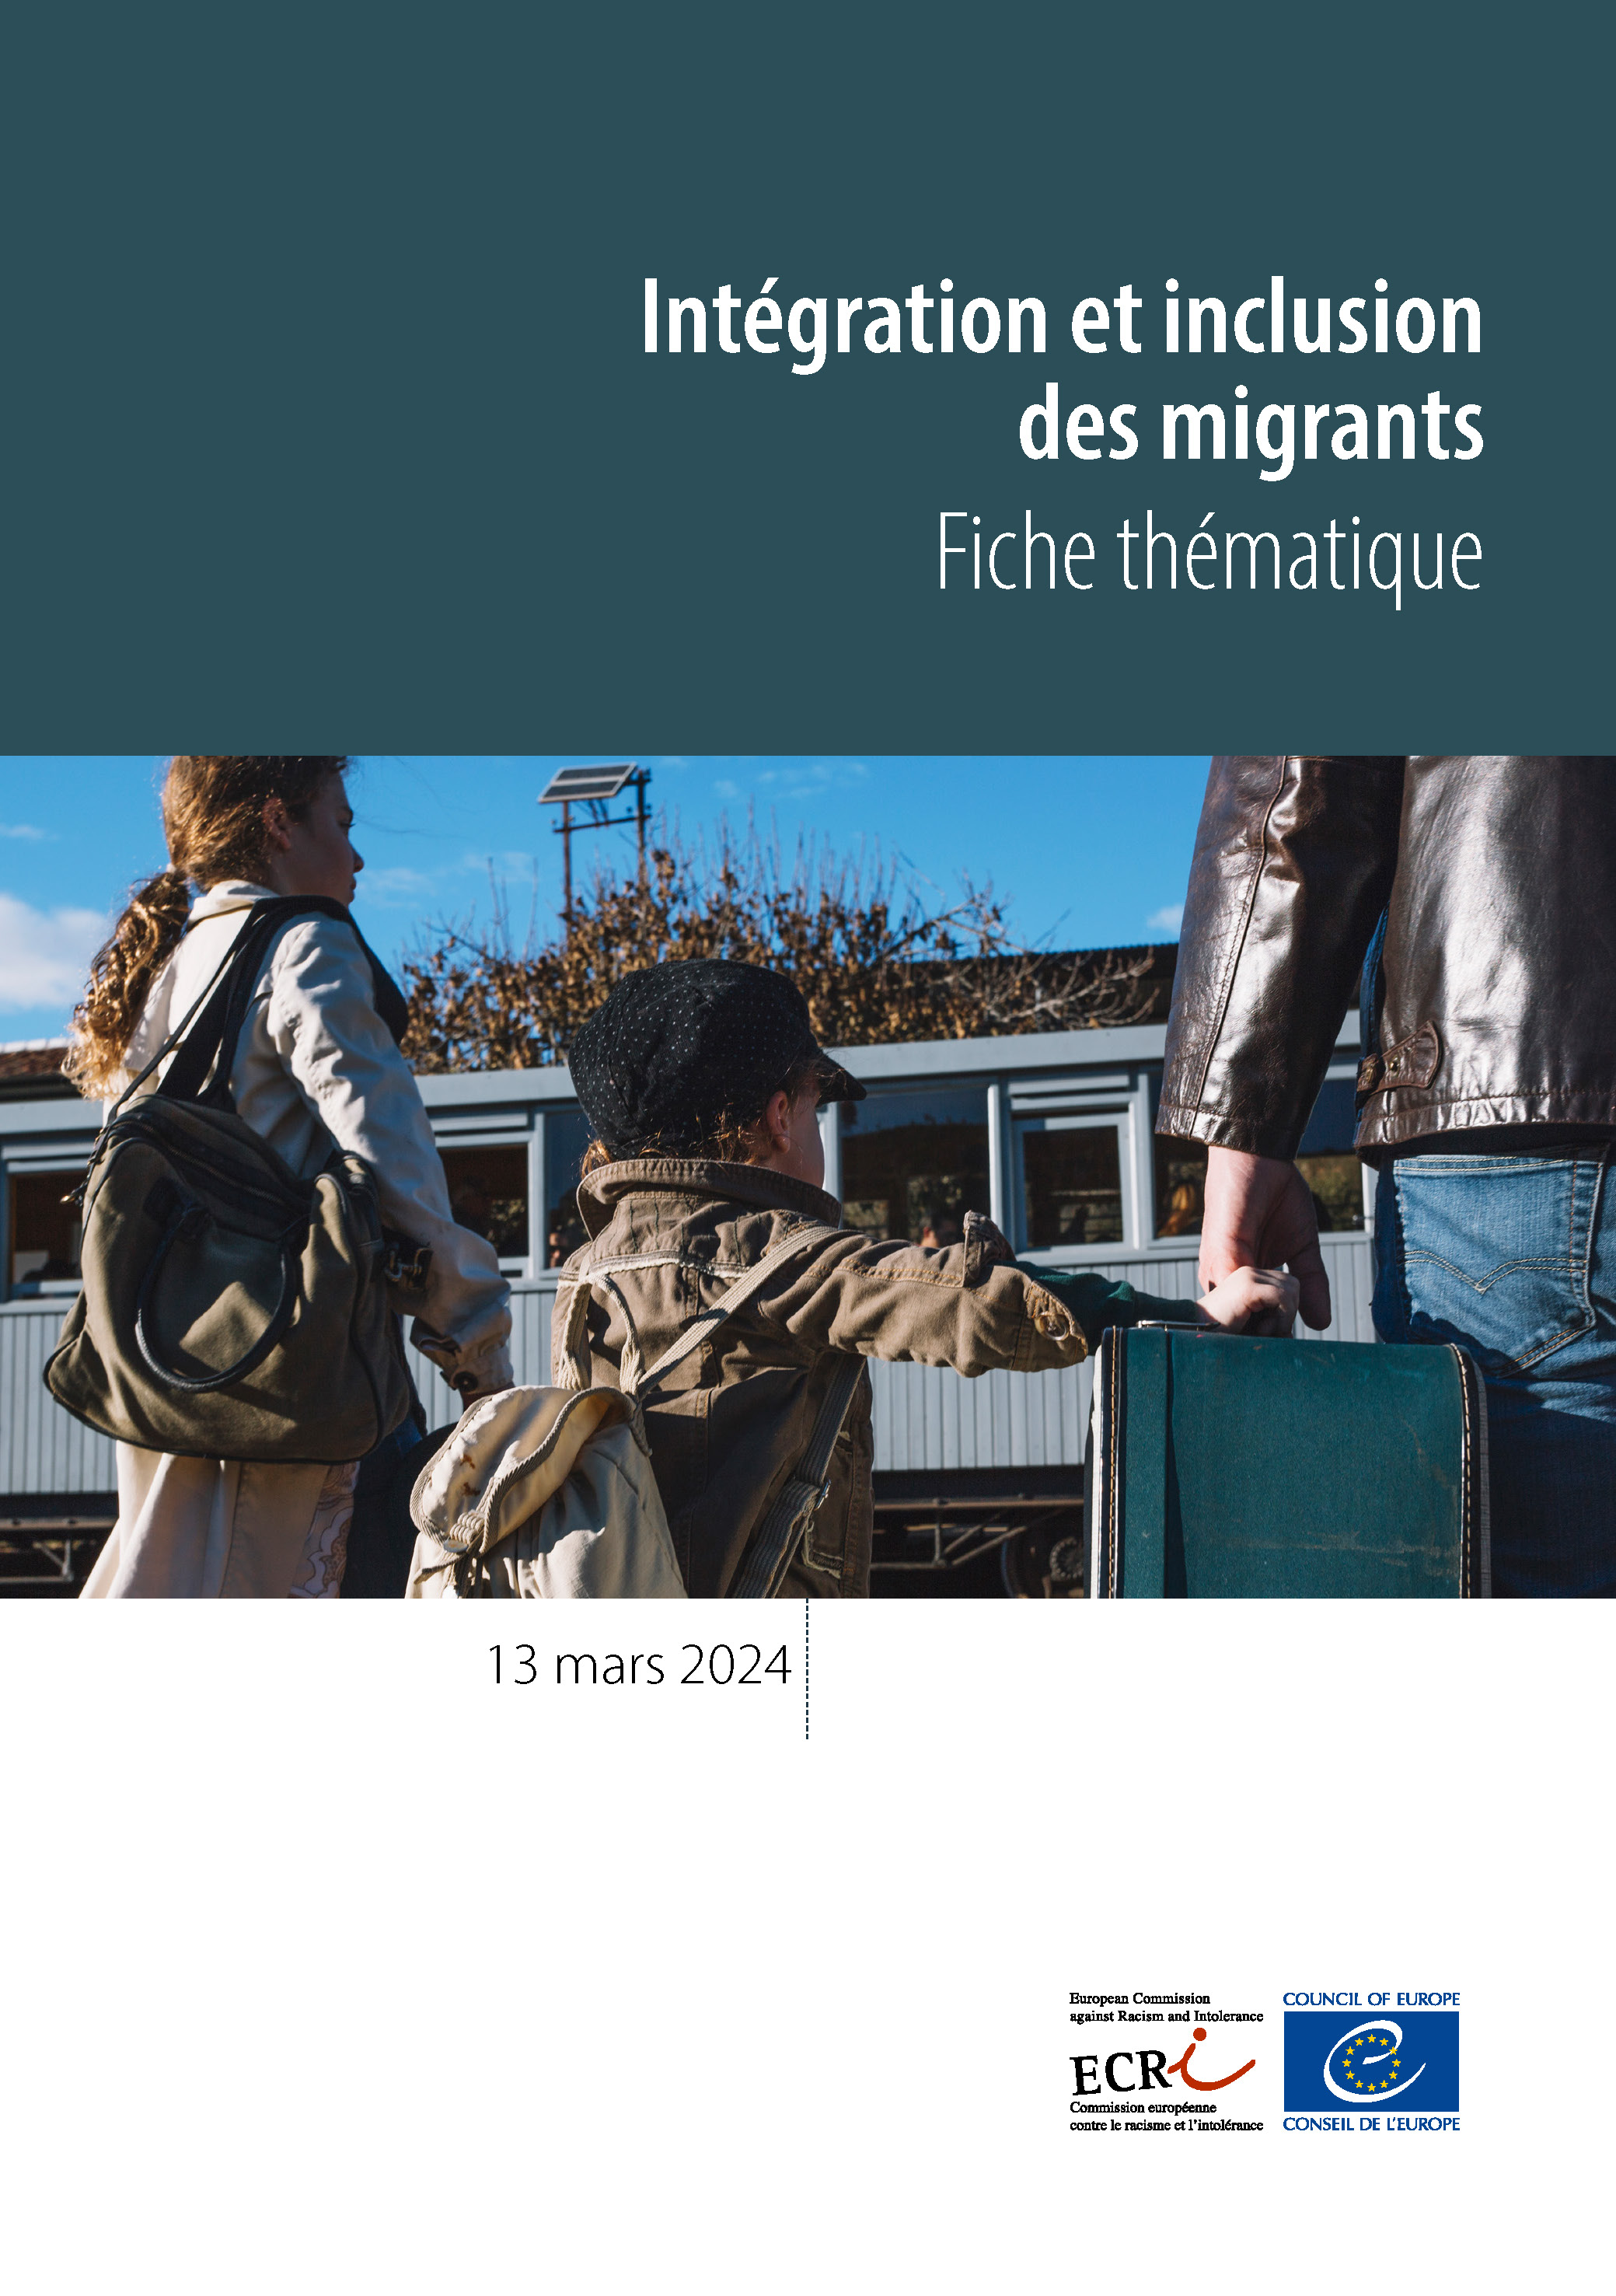 Integration and Inclusion of Migrants